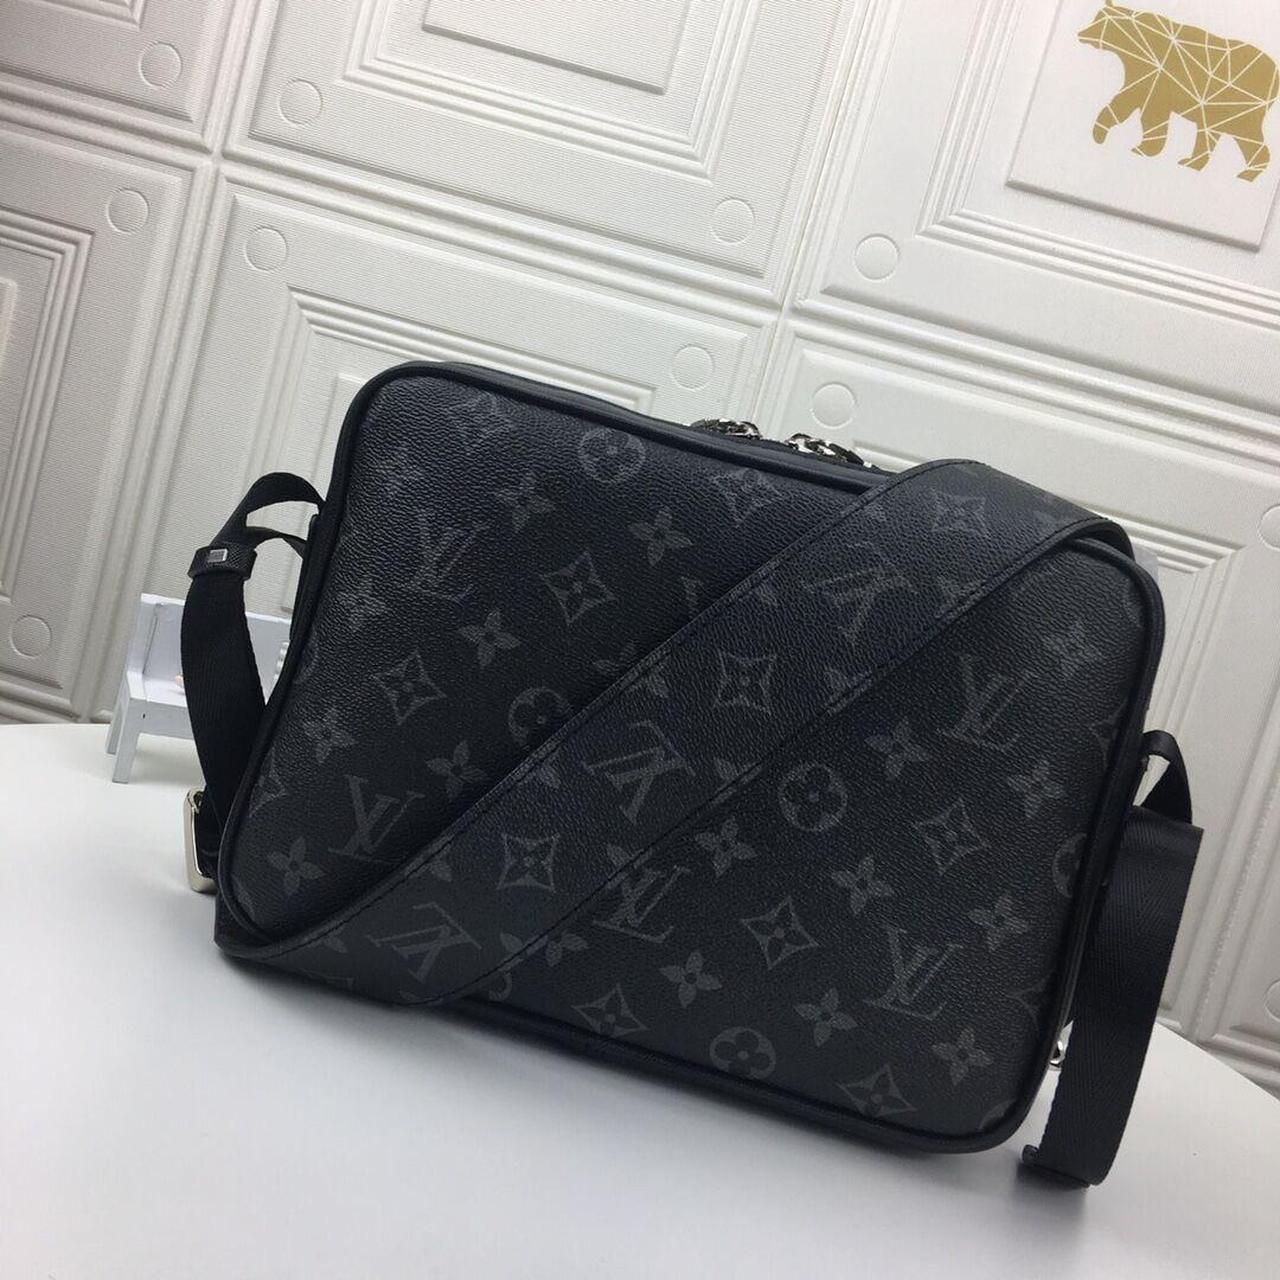 Lv outdoor messenger bag. Comes with dustbag gift... - Depop